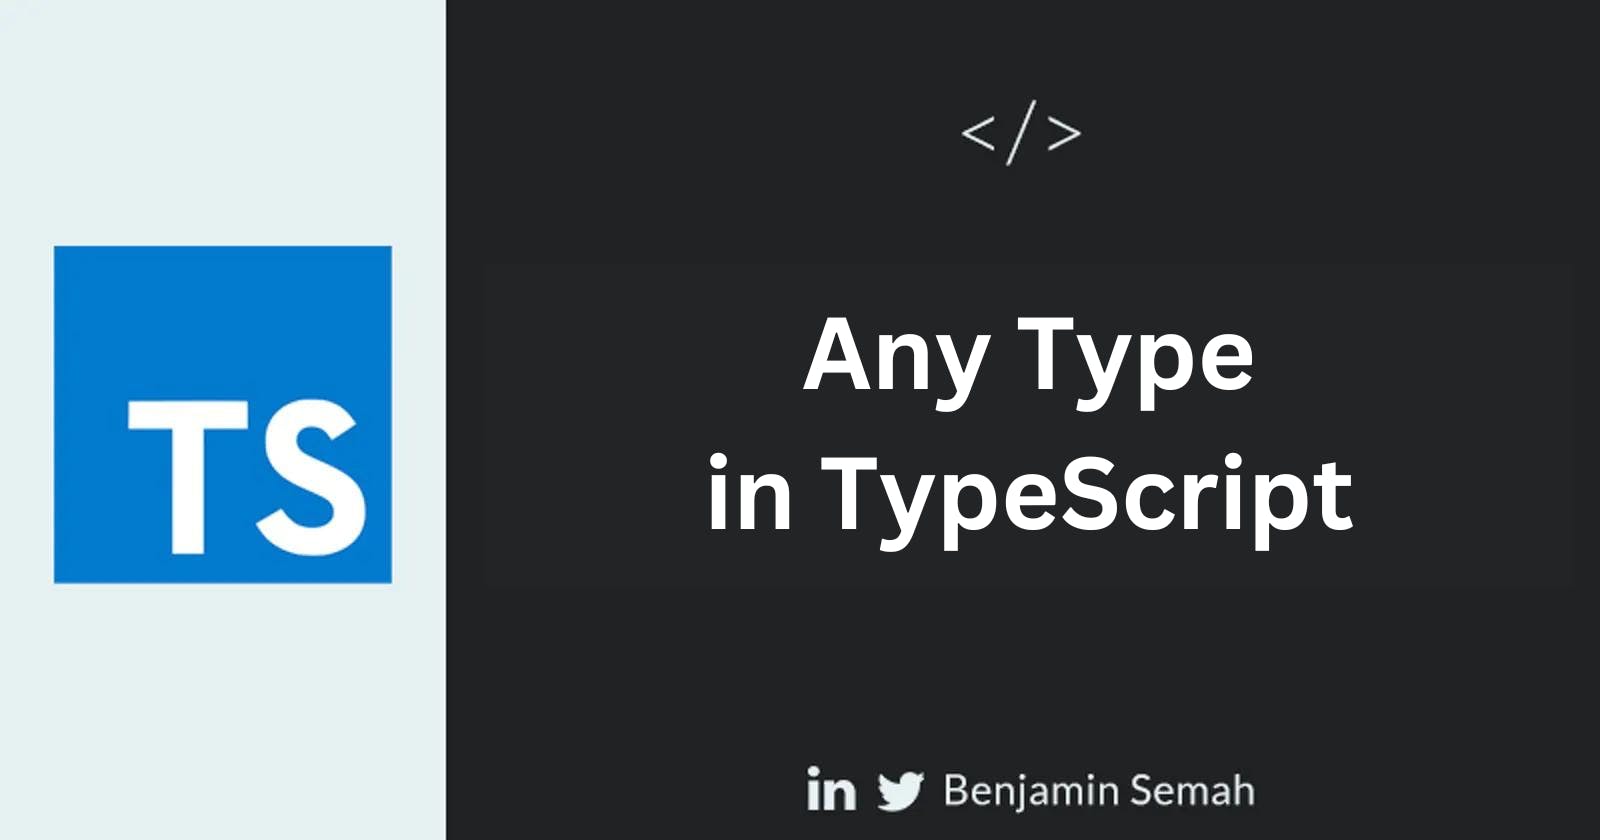 The Any Type in TypeScript